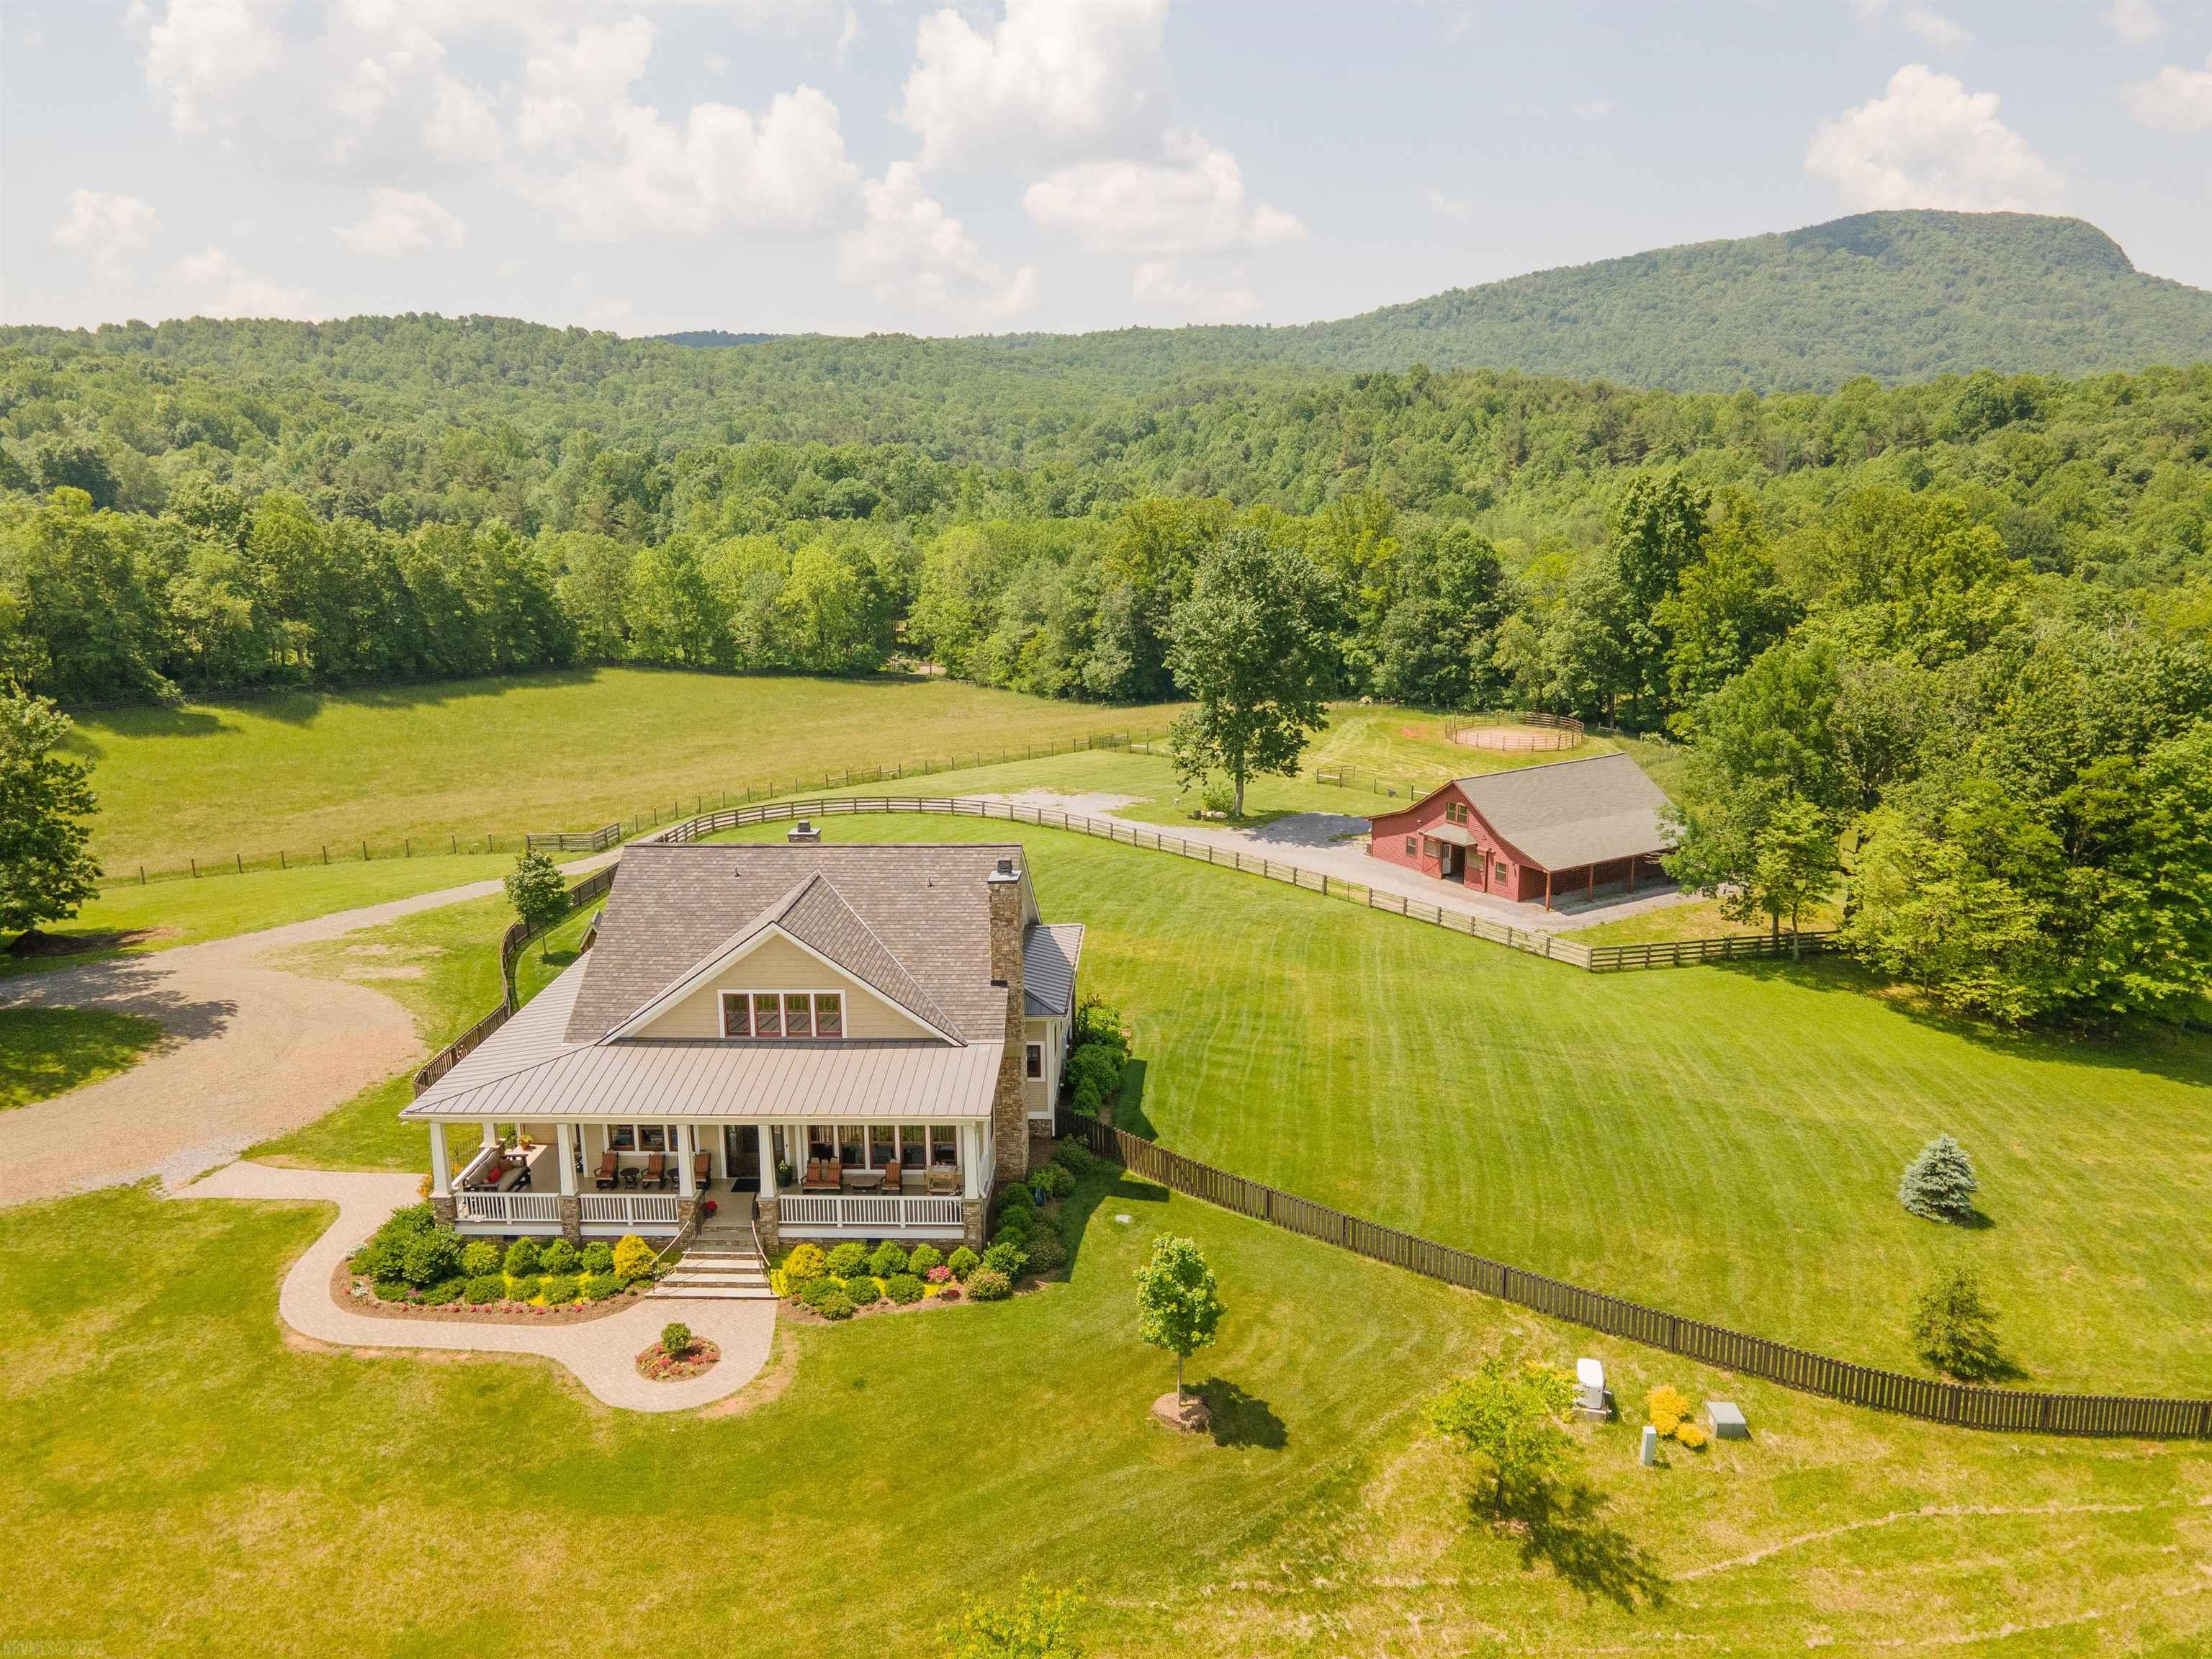 Spectacular horse farm nestled in the Blue Ridge Mountains of southwest Virginia. 105 gorgeous acres with 2 homes, 2 barns, luxury barn apartment and arena. Completely fenced and cross fenced.  The main house, completed in 2017, reveals the fabulous mountain views. Natural light flows in from large windows in every room. Featured in the Floyd County Tour of Homes, this craftsman style home shows impeccable attention to detail at every turn.  The guest house, a charming, fully renovated 1820 farmhouse, overlooks the spring fed pond well stocked with bass.  The barn, built in 2020, is a horse owners dream. 5 stalls with rubber mats, aisle with rubber pavers, tongue and groove pine walls and ceiling, wash rack, air conditioned tack room and apartment. Many more features along with room dimensions under documents tab.